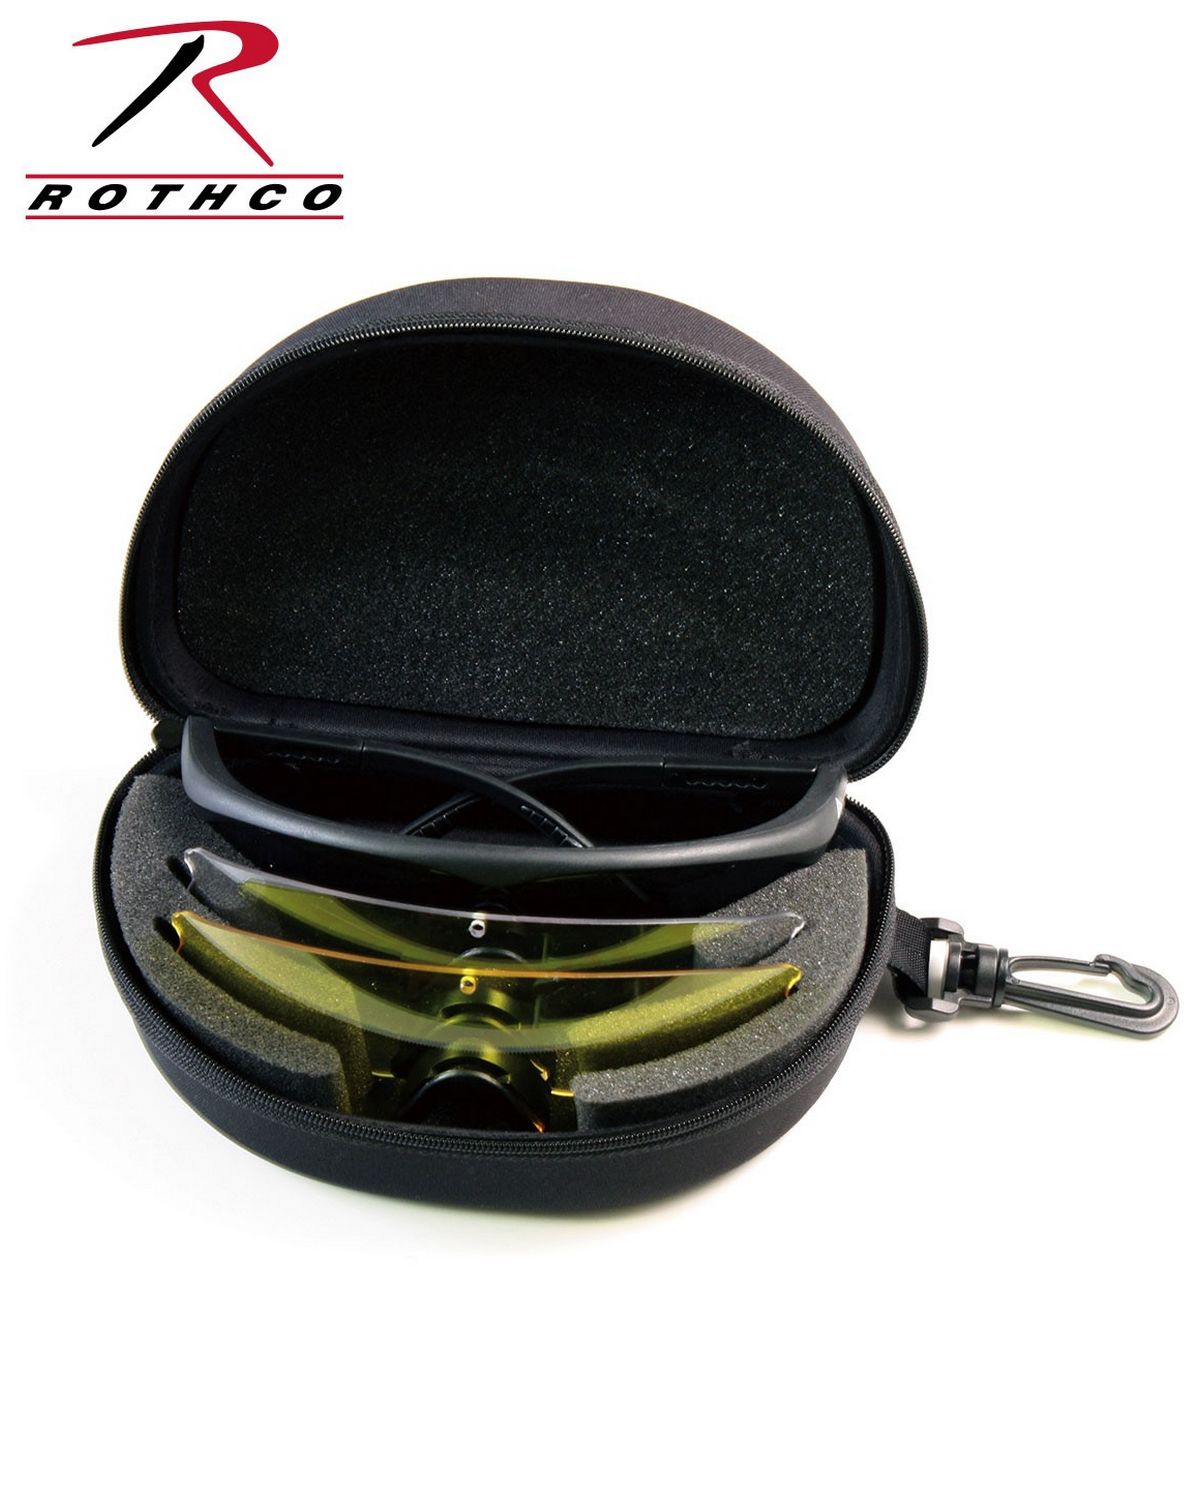 Rothco Firetec Interchangeable Sport Glass Lens System Tactical Glasses 10337 